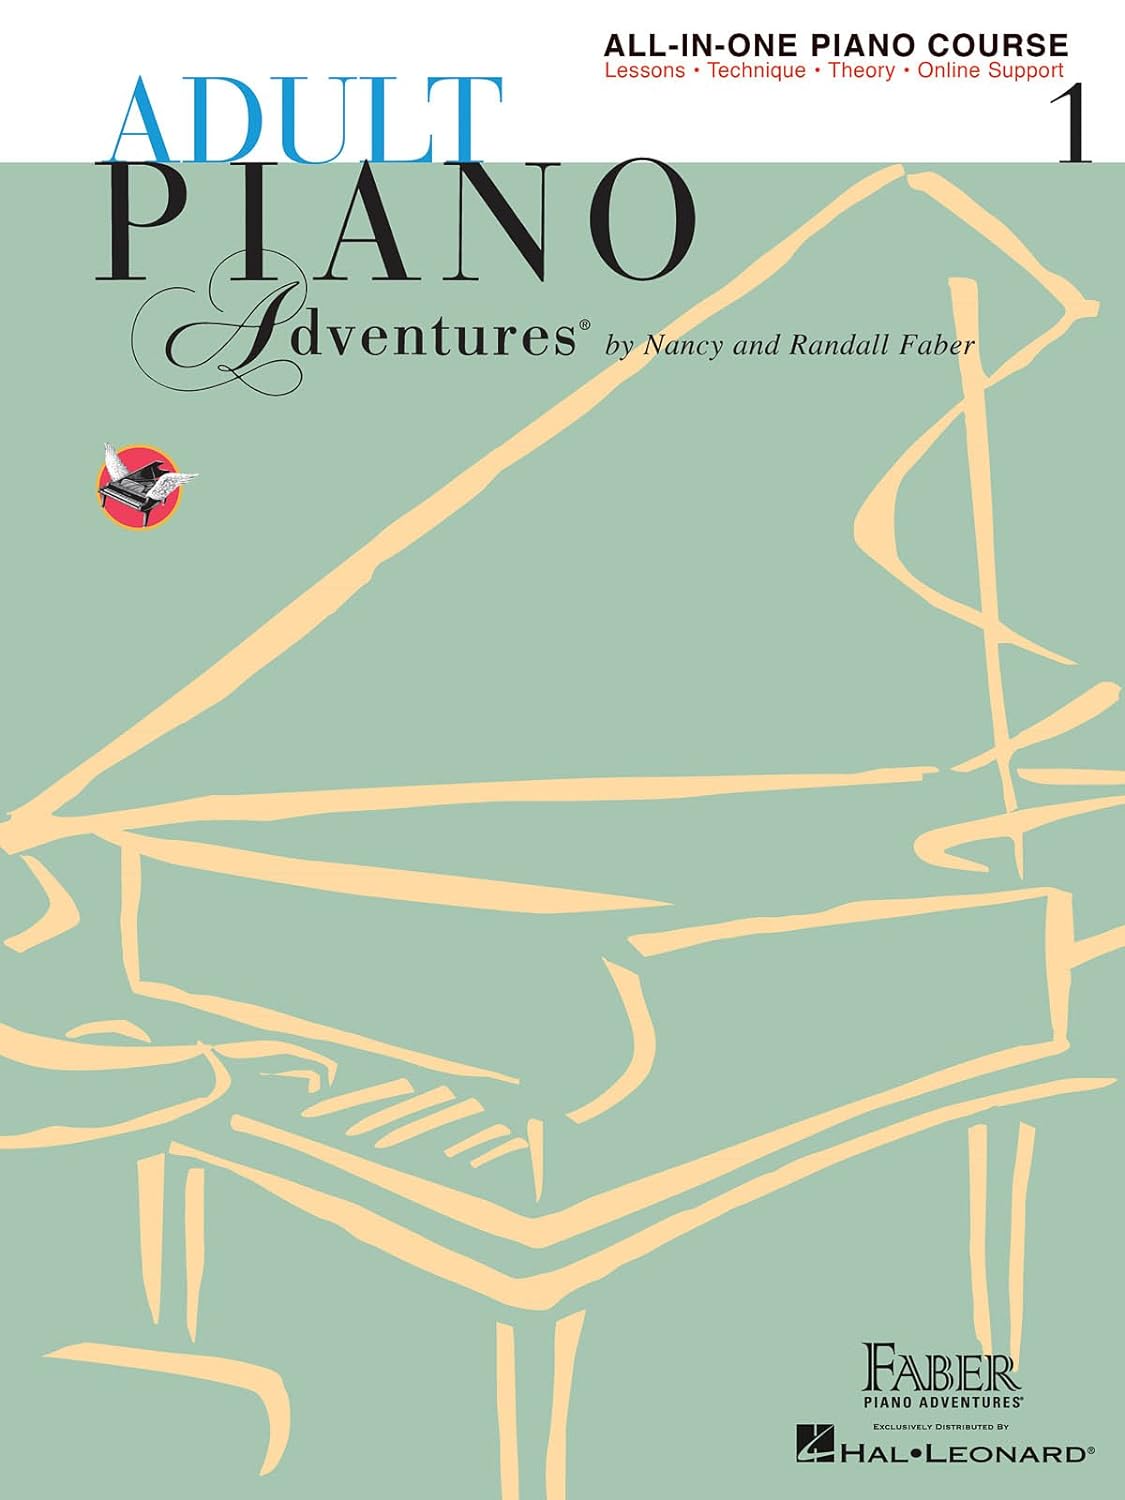 Adult Piano Adventures by Nancy and Randall Faber